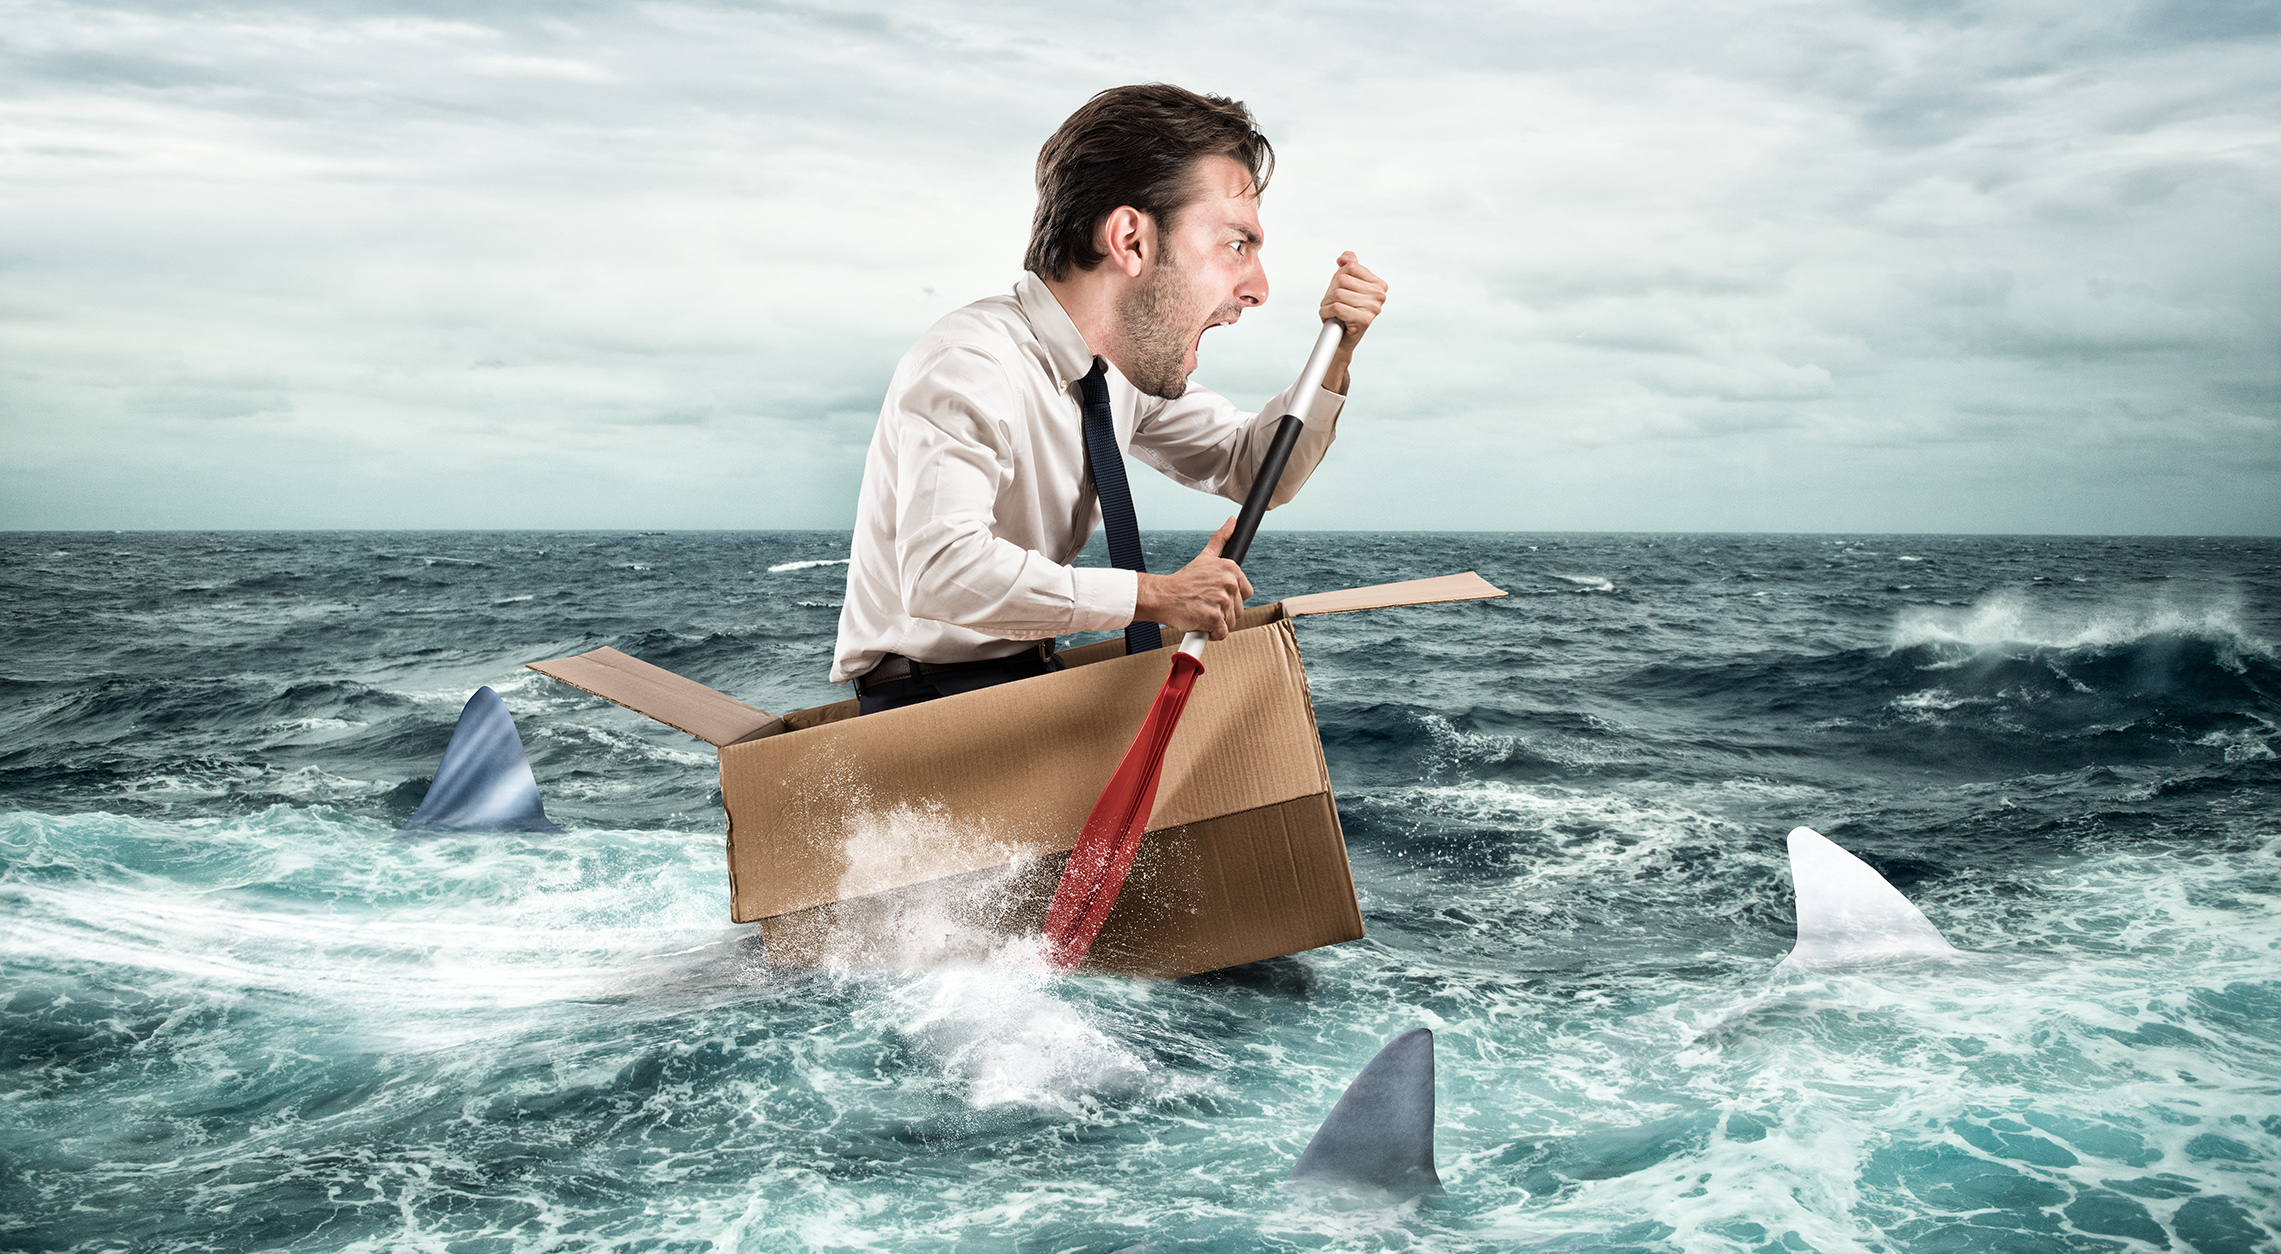 businessman in troubled waters yelling and trying to paddle his way out of sharks who surround him